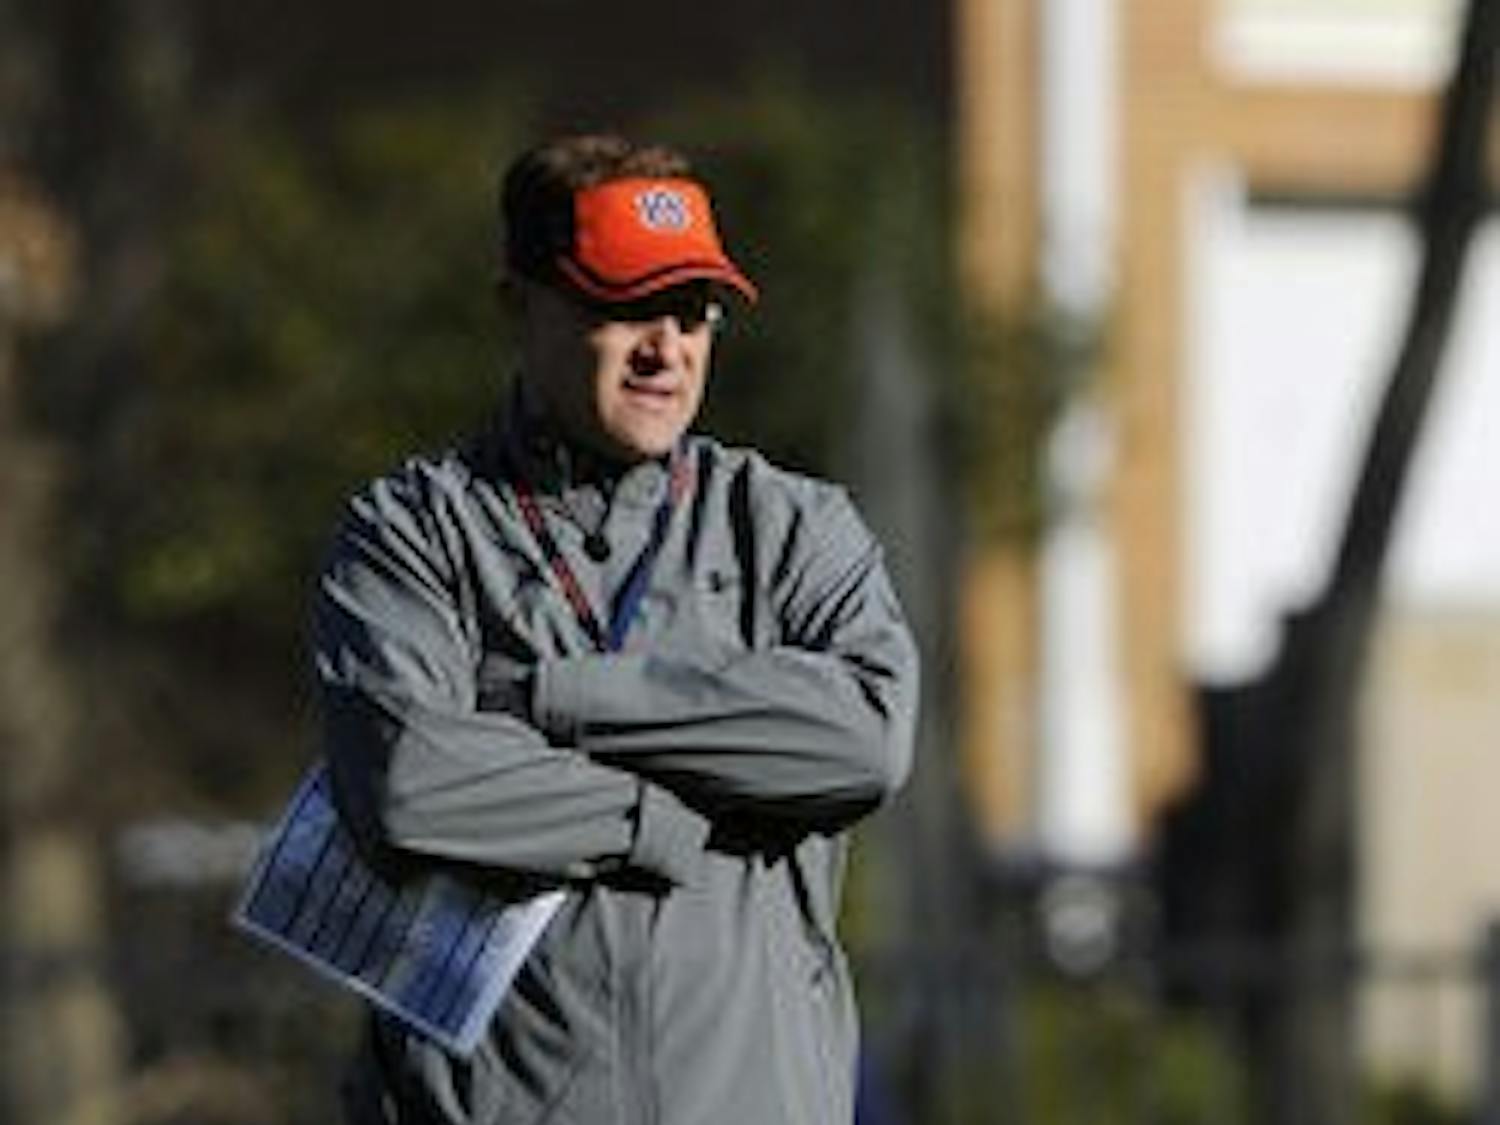 Gus Malzahn watches as his Tigers take the field for the first practice under the new head coach. (COURTESY OF TODD VAN EMST)